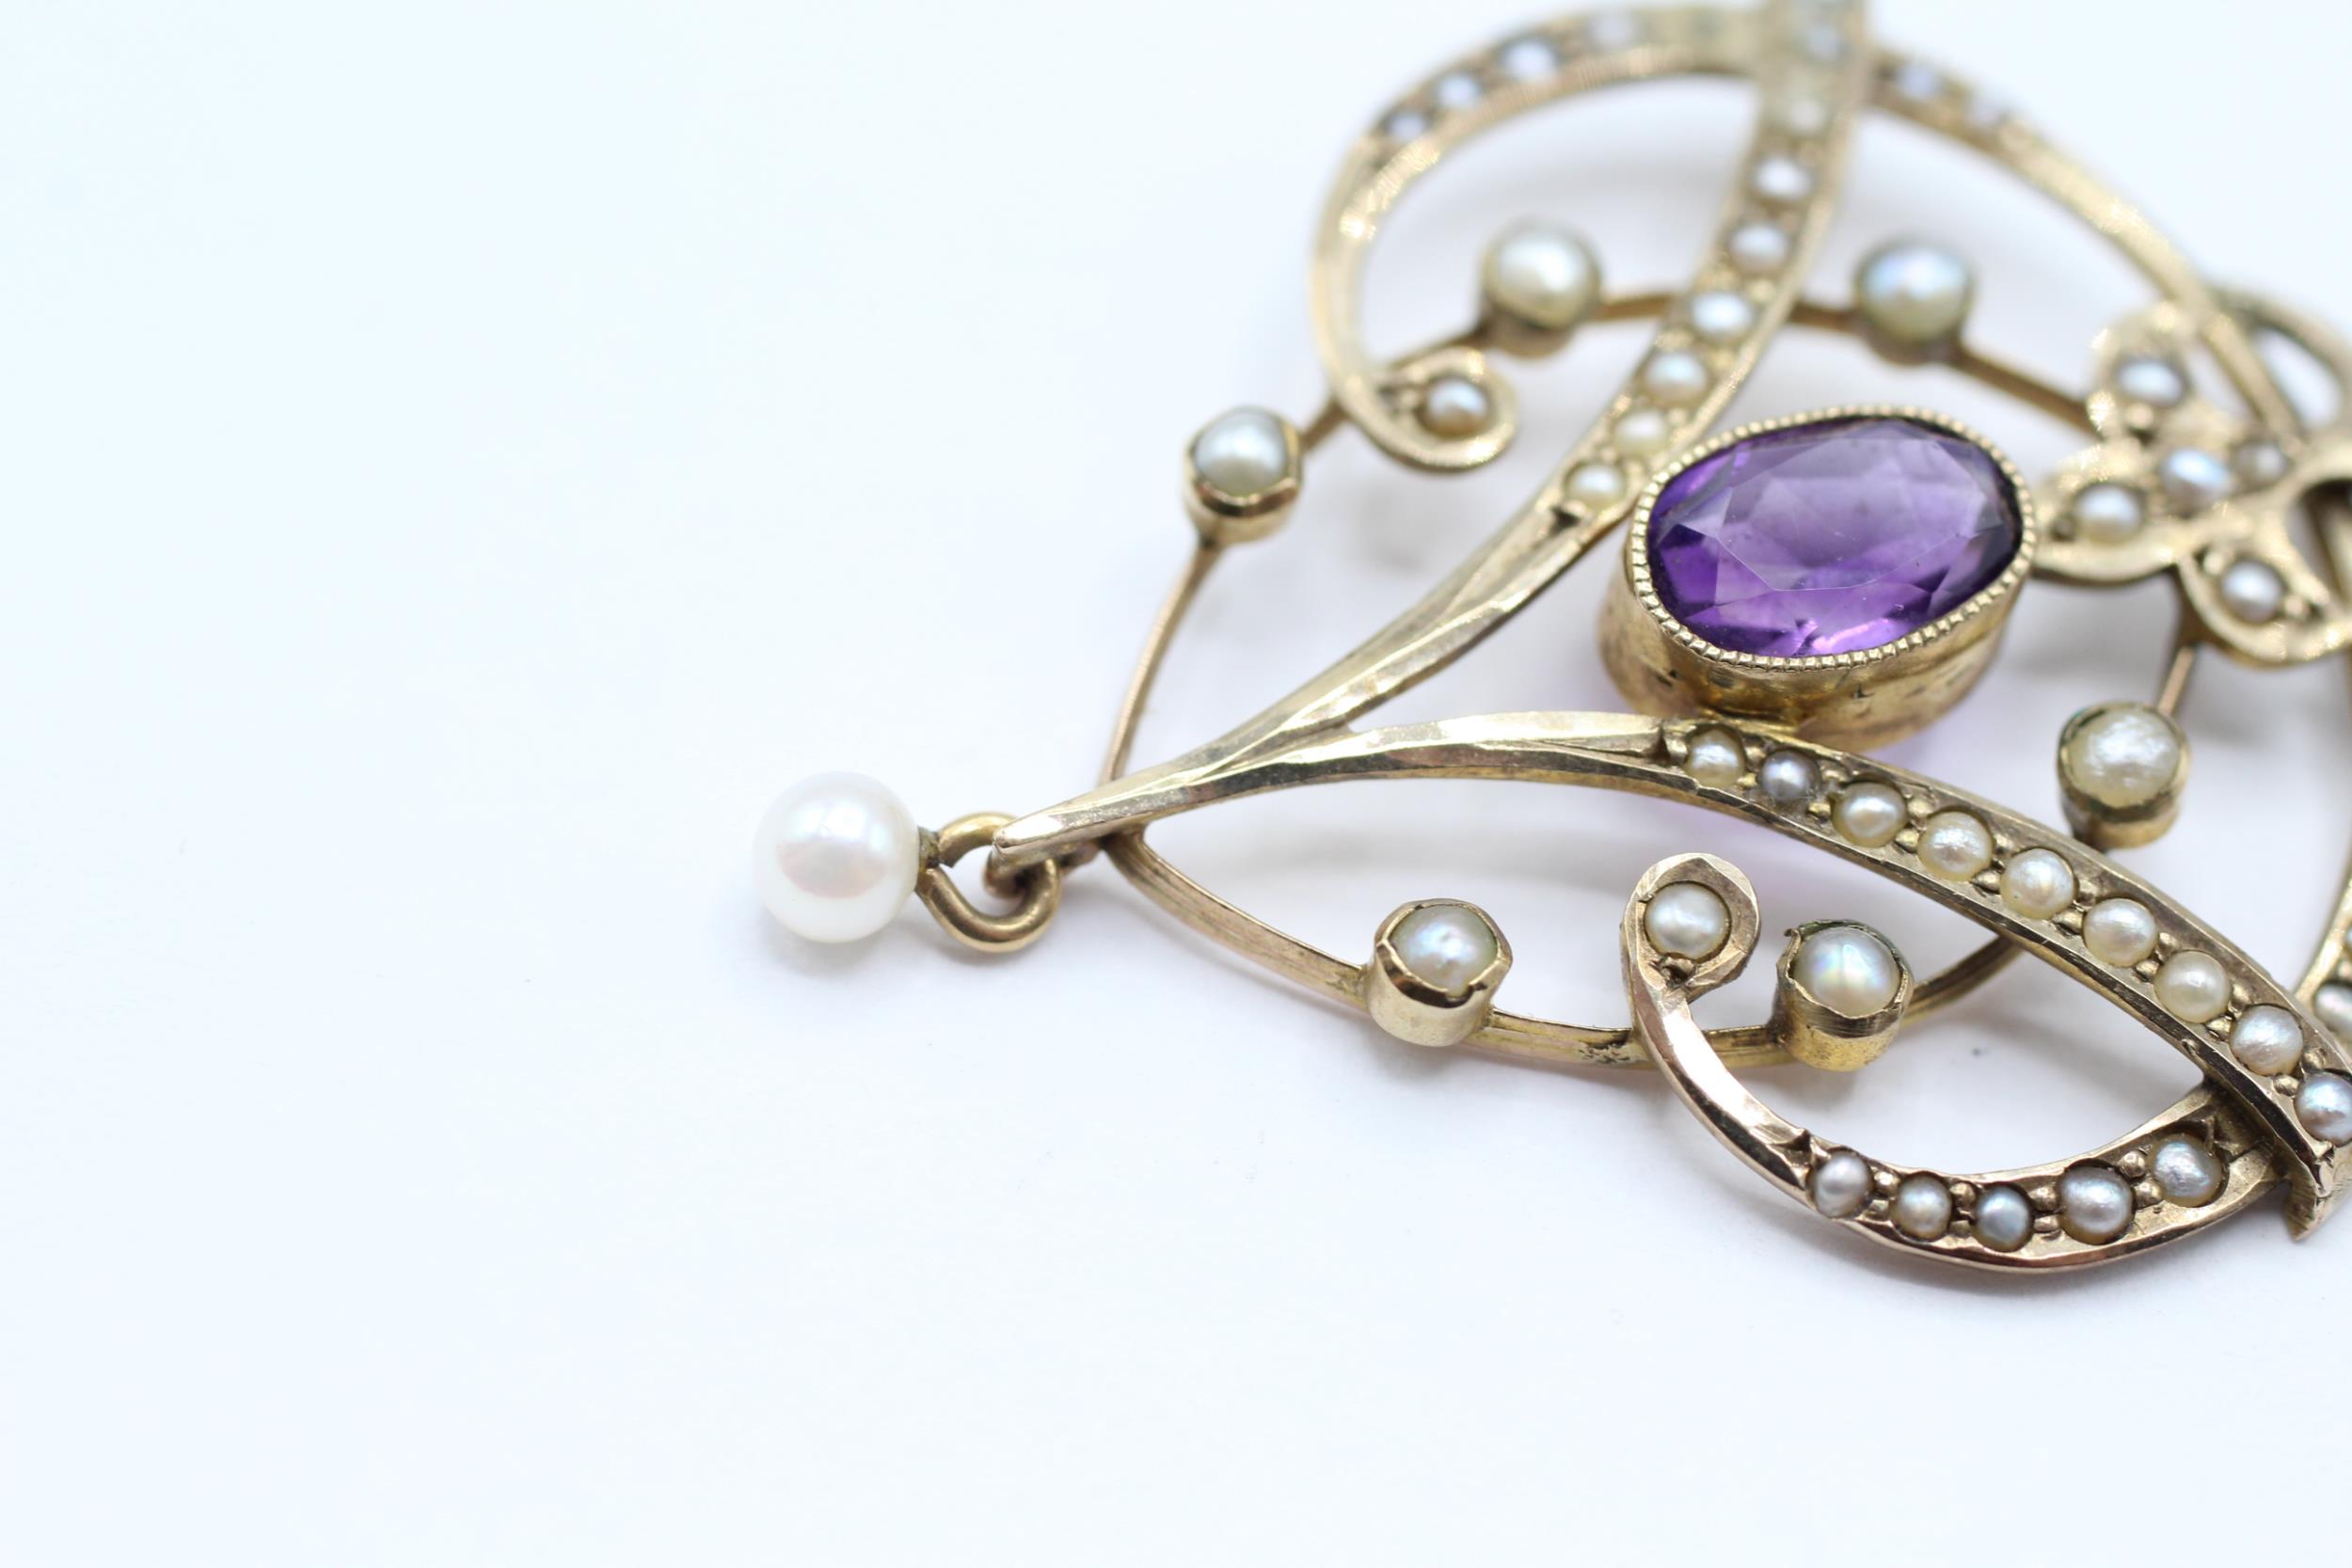 9ct gold Edwardian amethyst & seed pearl pendant with a drop cultured pearl 3.3 g - Image 2 of 5